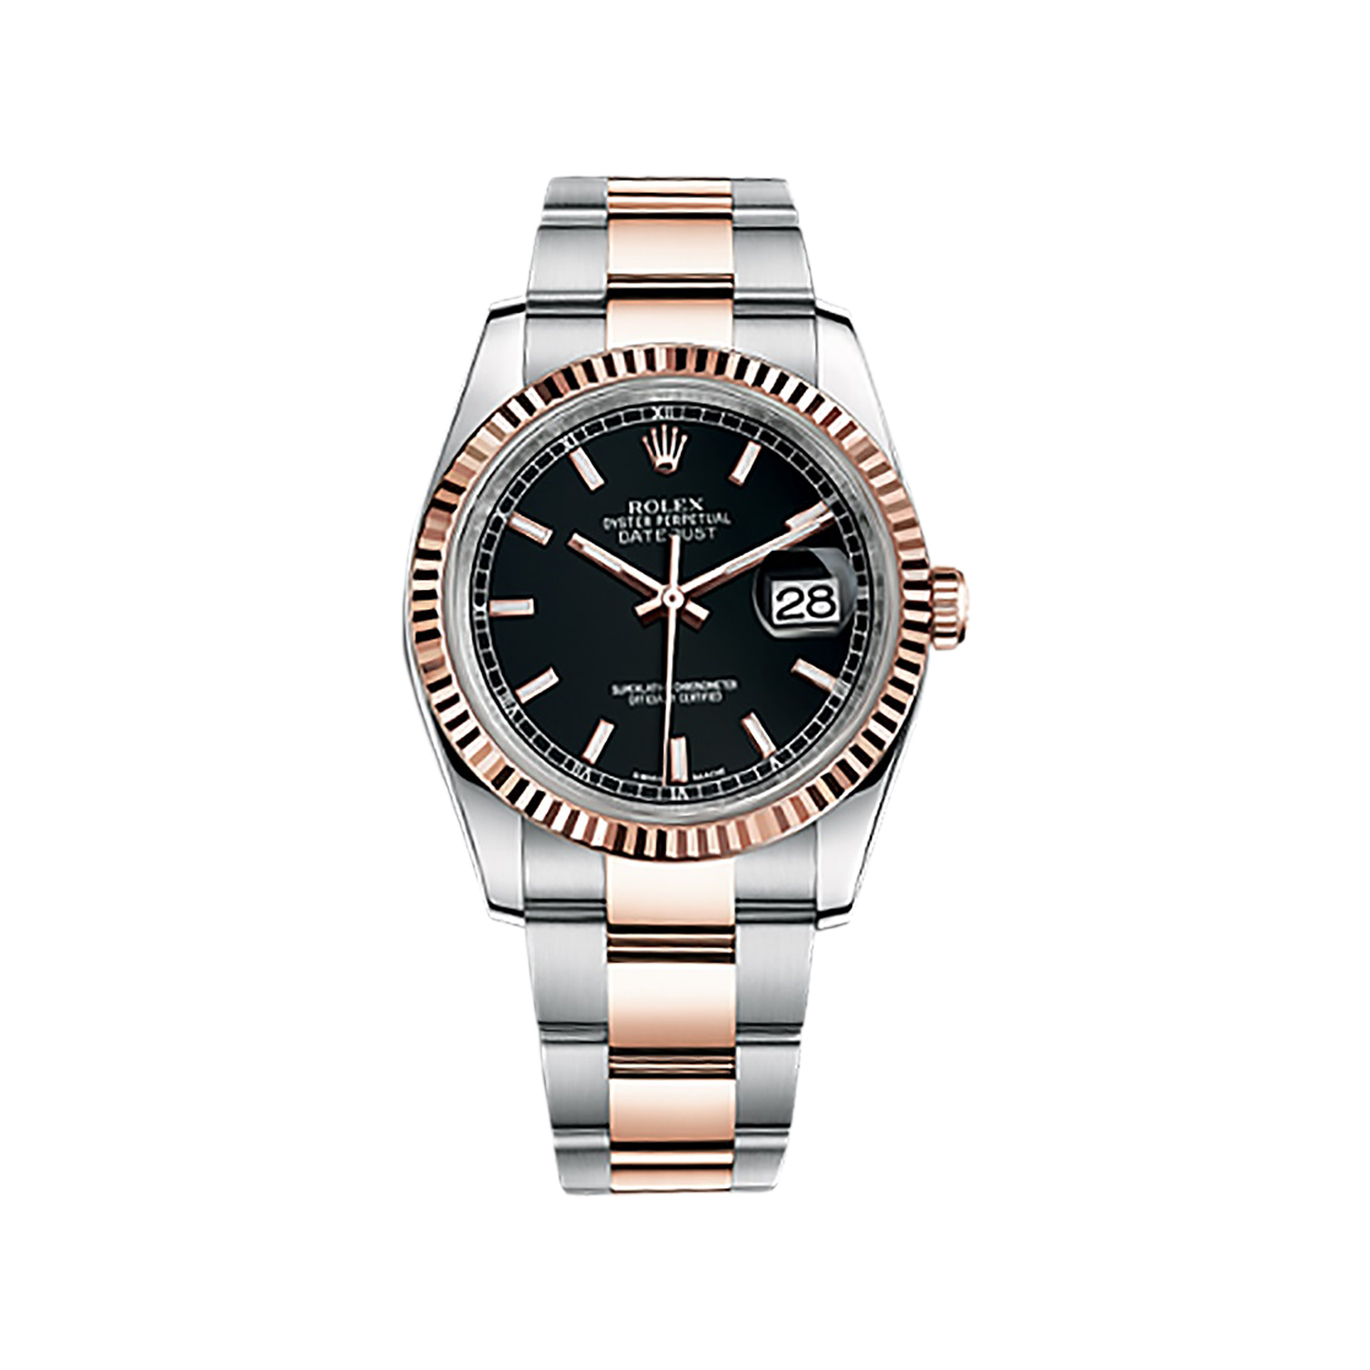 Datejust 36 116231 Rose Gold & Stainless Steel Watch (Black) - Click Image to Close